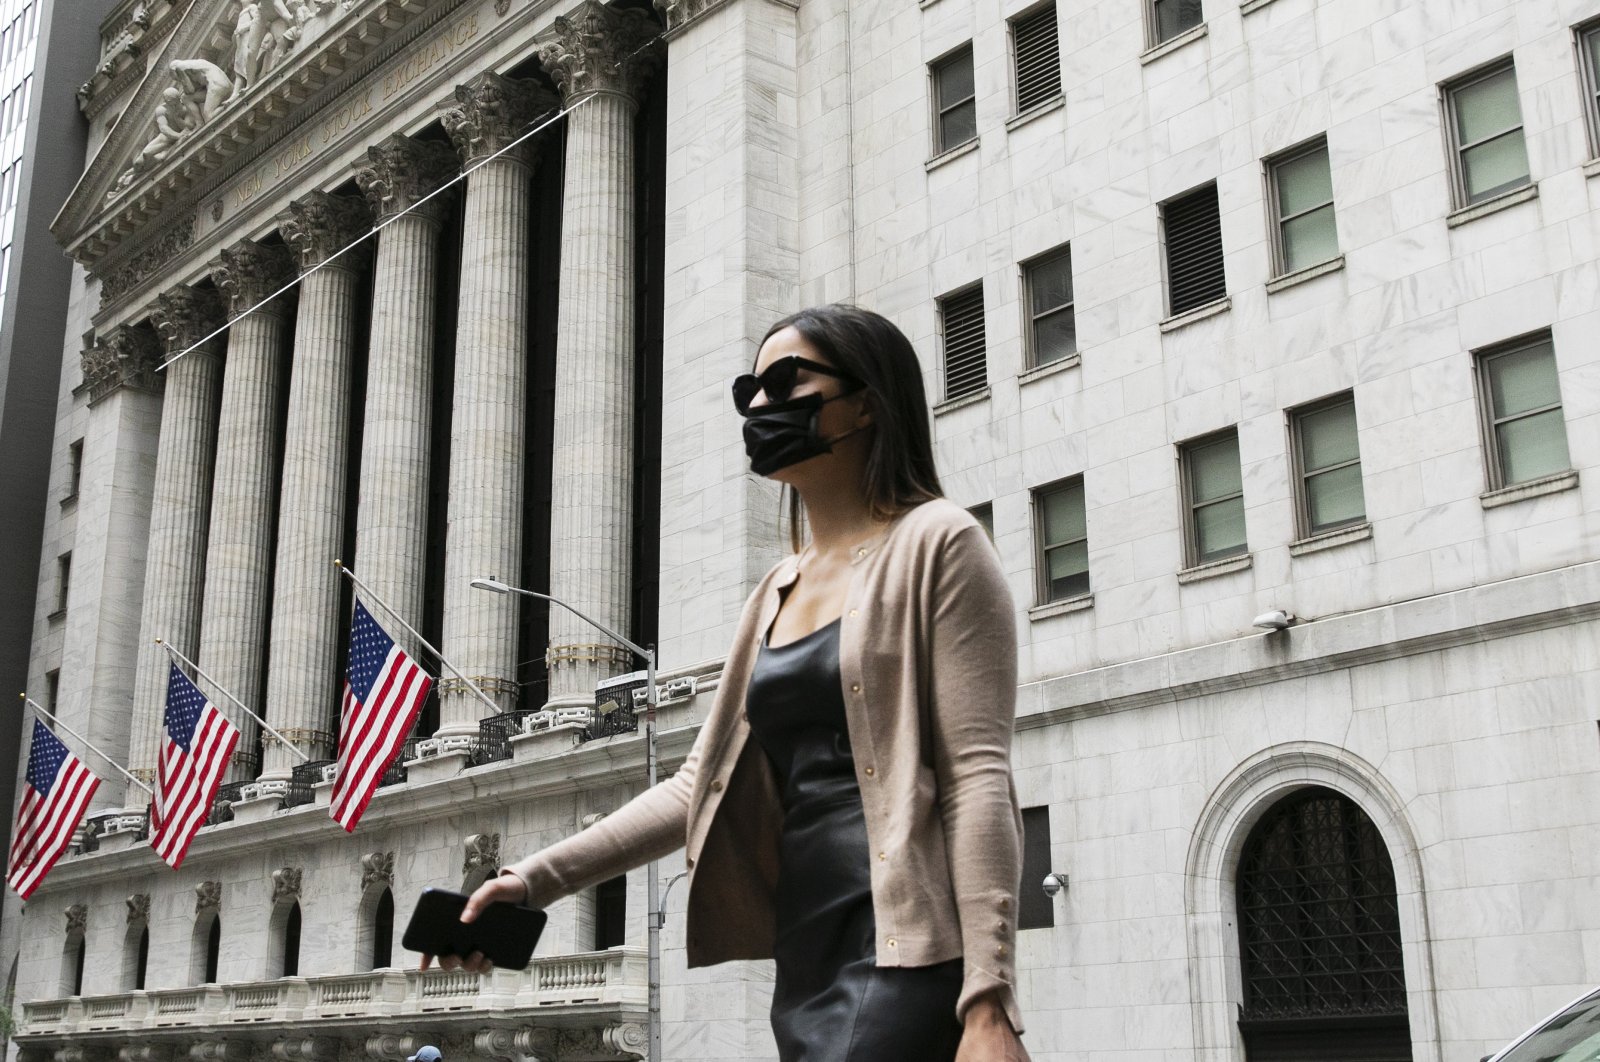 A woman wearing a mask passes the New York Stock Exchange, Tuesday, June 30, 2020, during the coronavirus pandemic. (AP Photo)